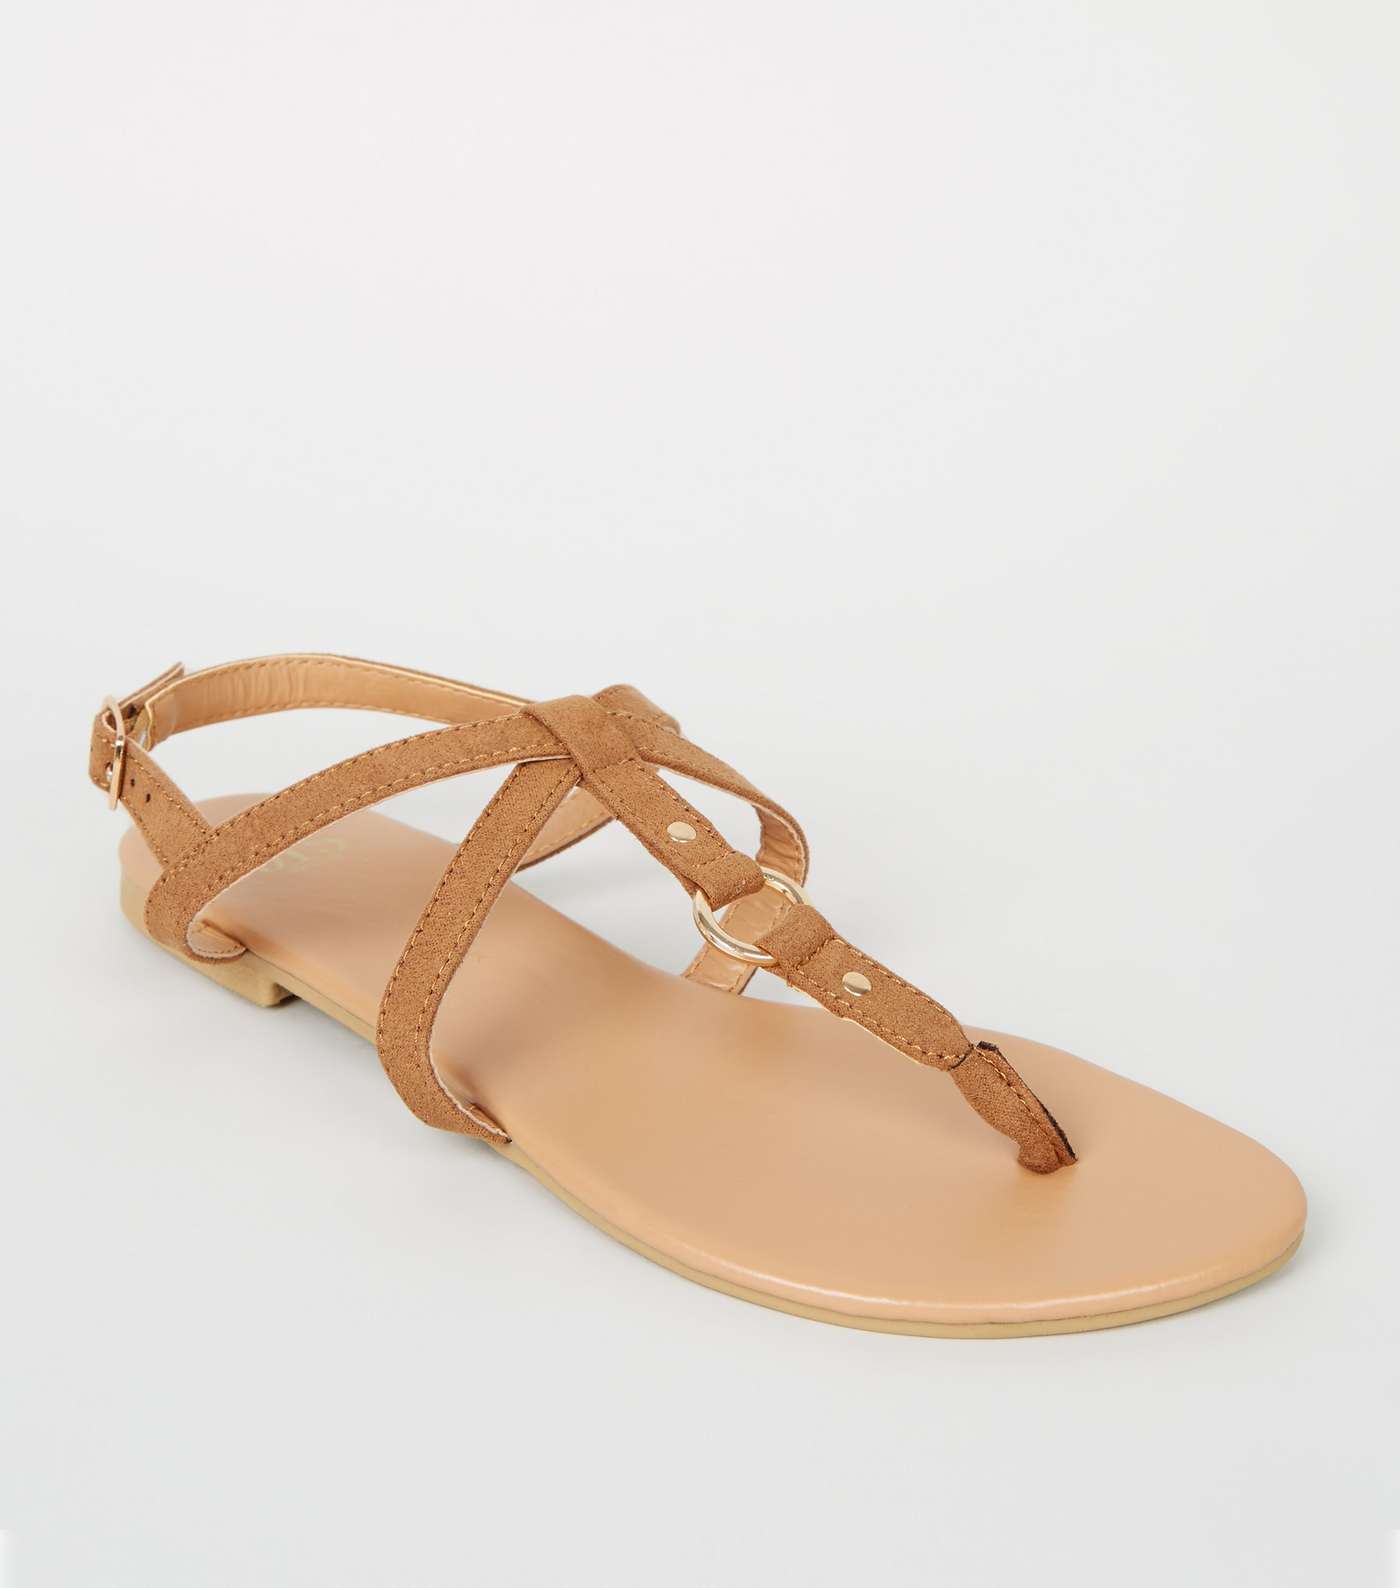 Girls Tan Leather-Look Strappy Sandals